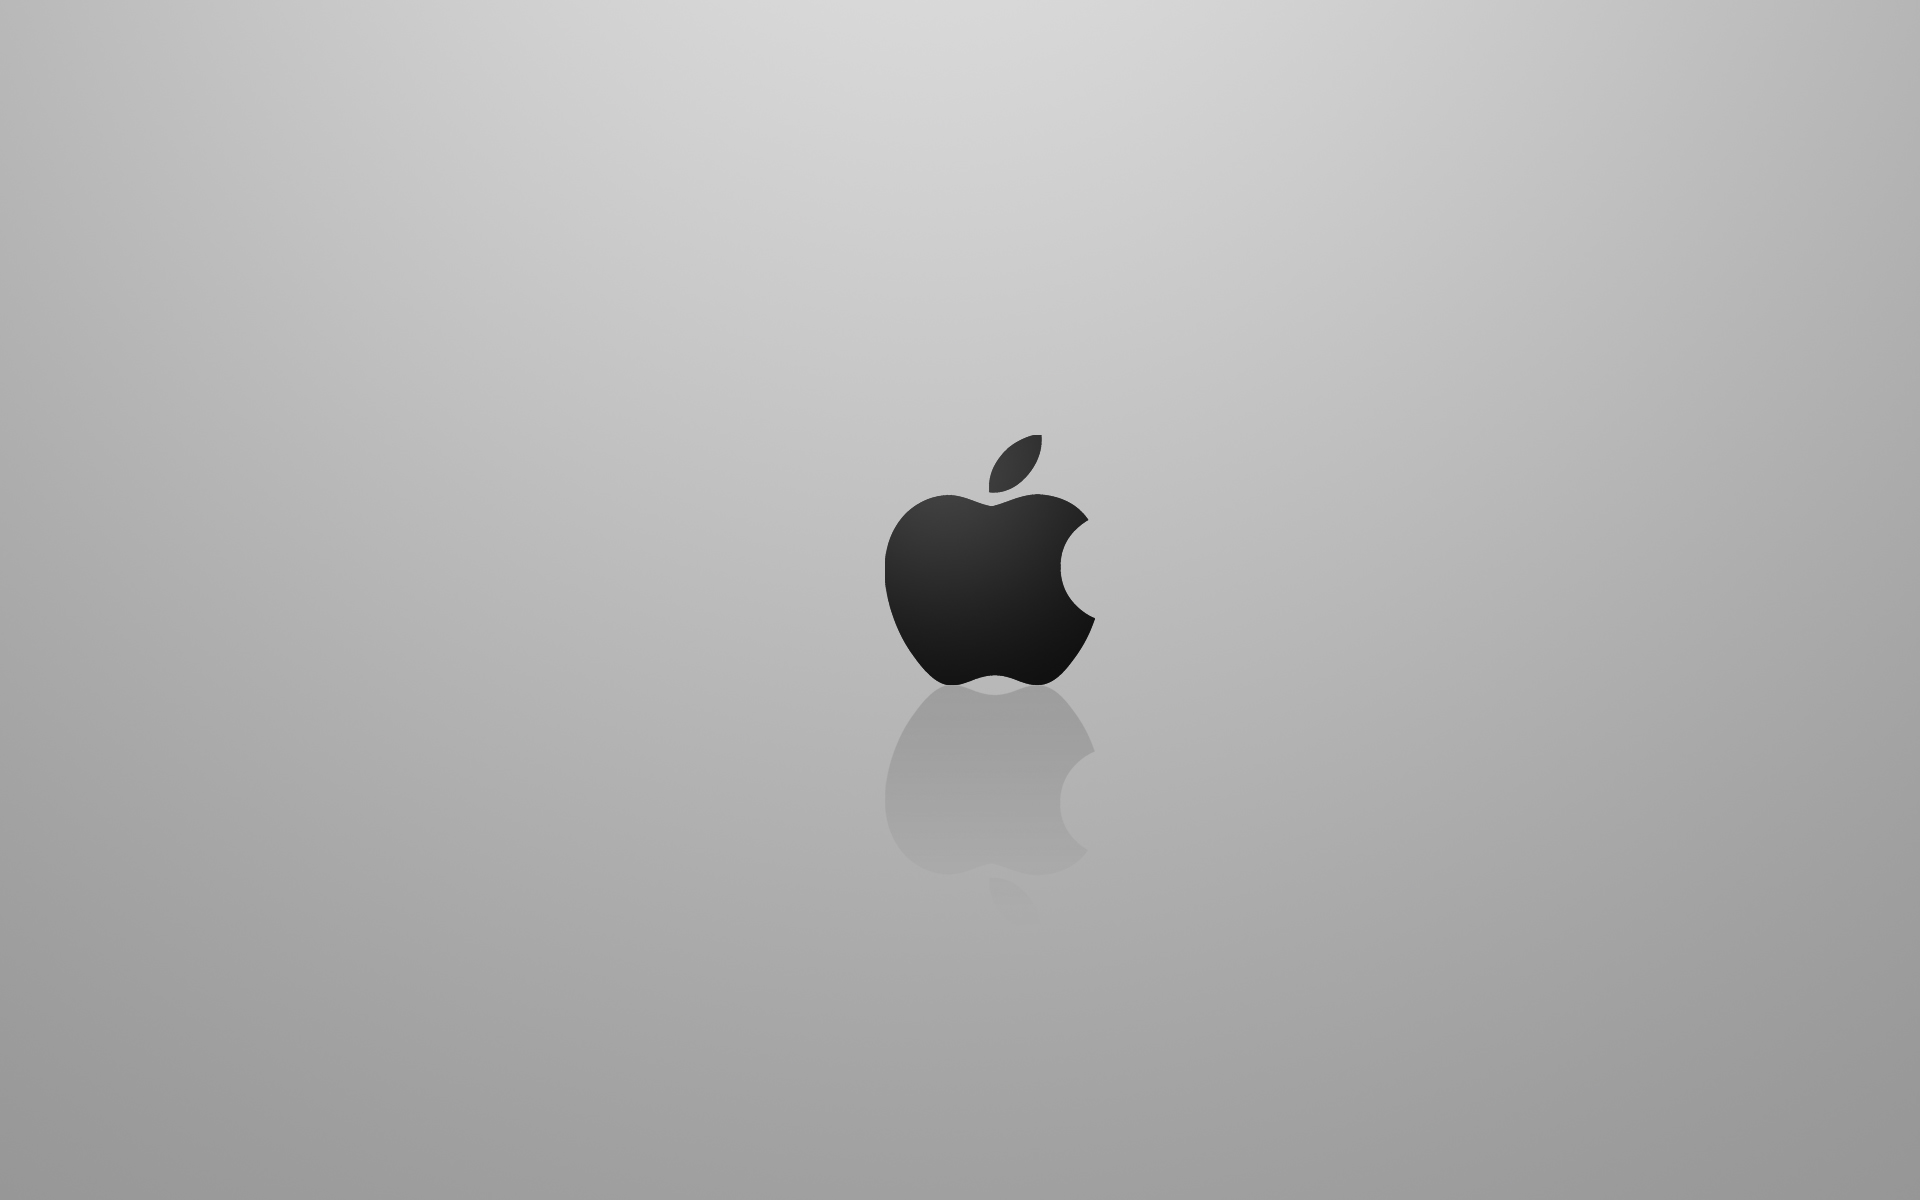 Free Download Mac Wallpapers Wallpaper Series Pictures Stunning Apple 19x10 For Your Desktop Mobile Tablet Explore 78 Mac Wallpaper Backgrounds Free Desktop Wallpapers For Mac Apple Mac Desktop Wallpaper